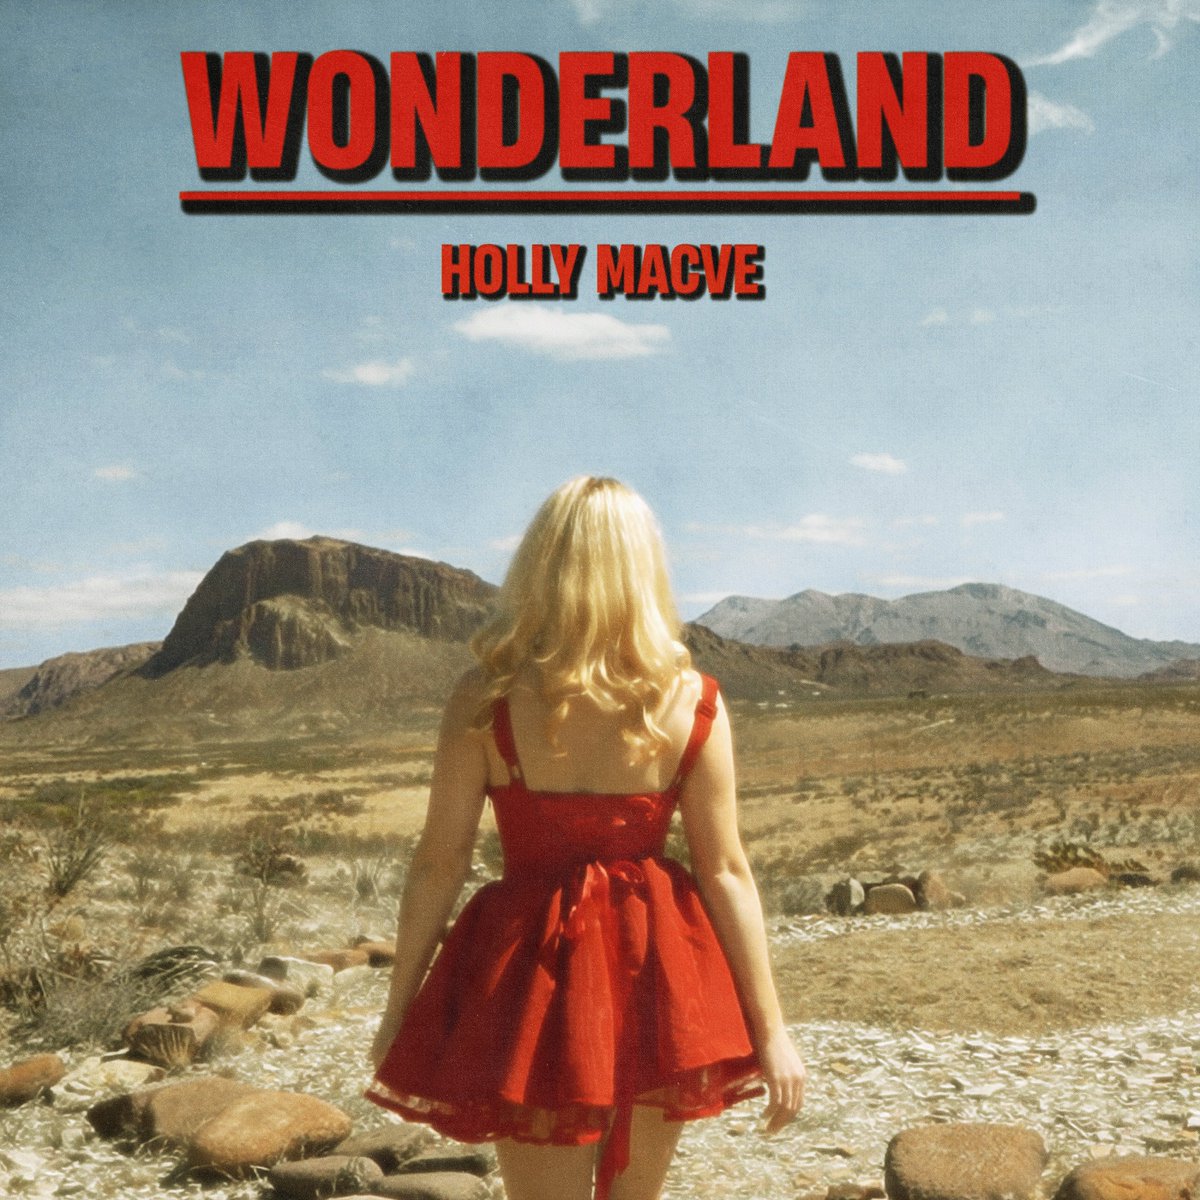 TaP Publishing artist, Holly Macve just dropped a stellar new track produced and co-written by @LondonGrammar's Dan Rothman. Listen to ‘WONDERLAND’ - out now and available on all platforms 😍✨